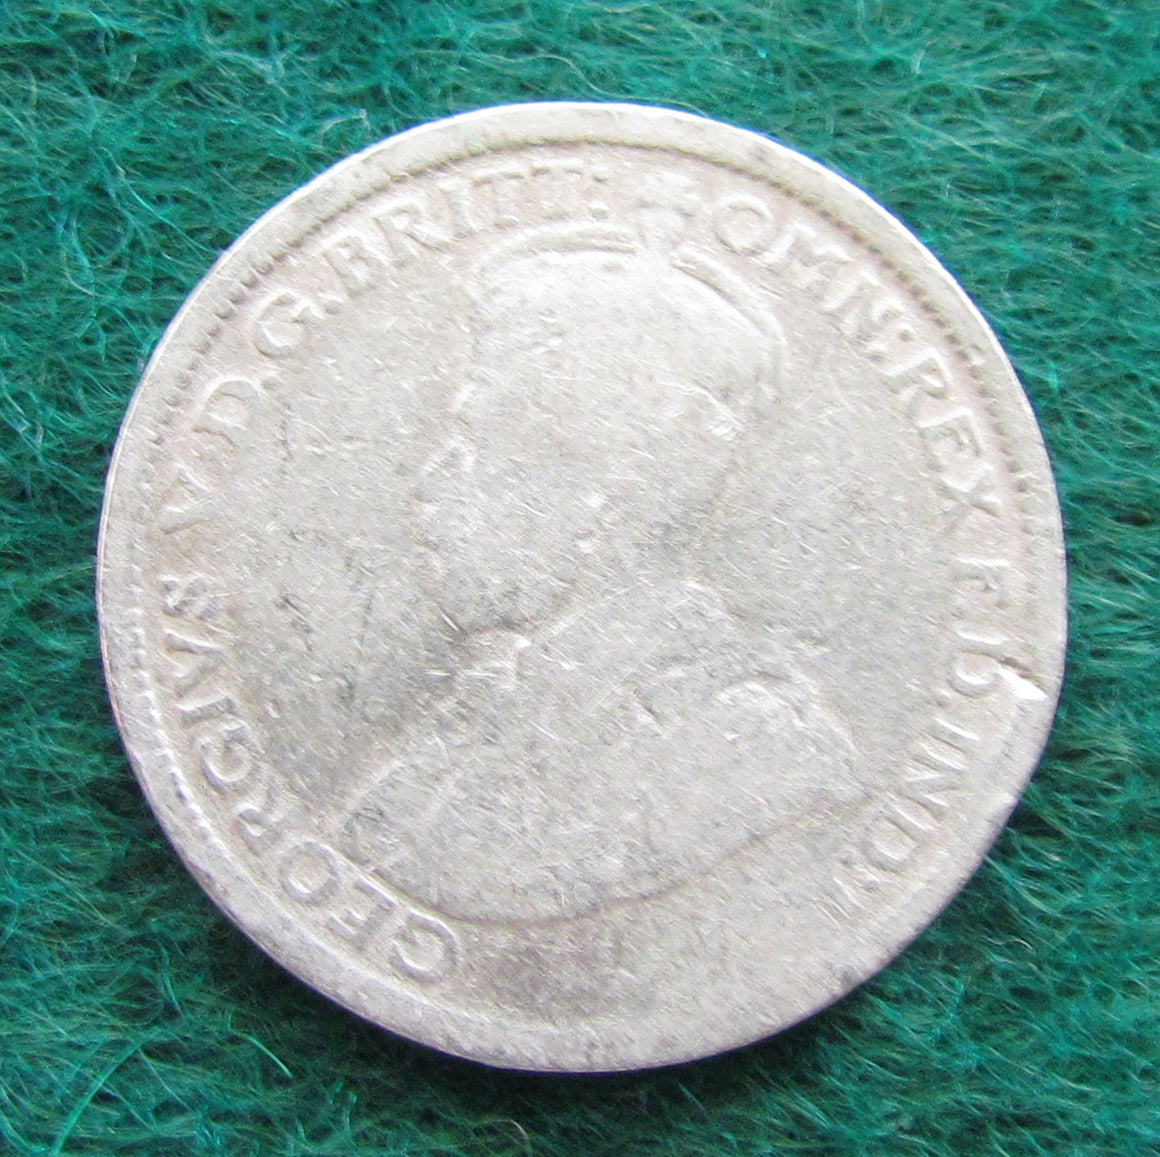 Australian 1917 M 6d Sixpence King George V Coin - Circulated